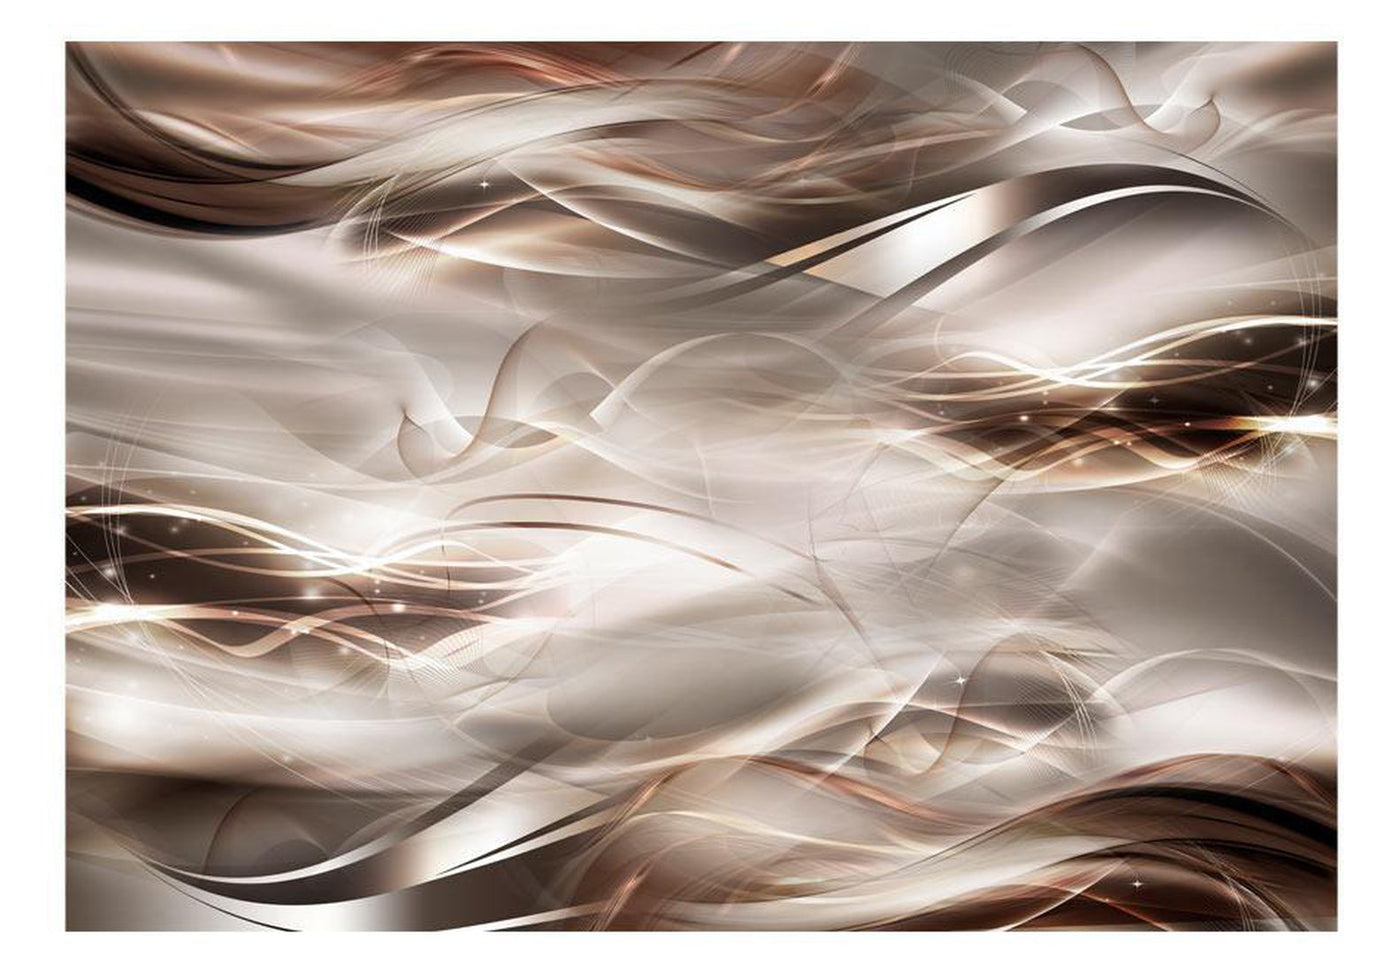 Peel and stick wall mural - Umber Waves-TipTopHomeDecor